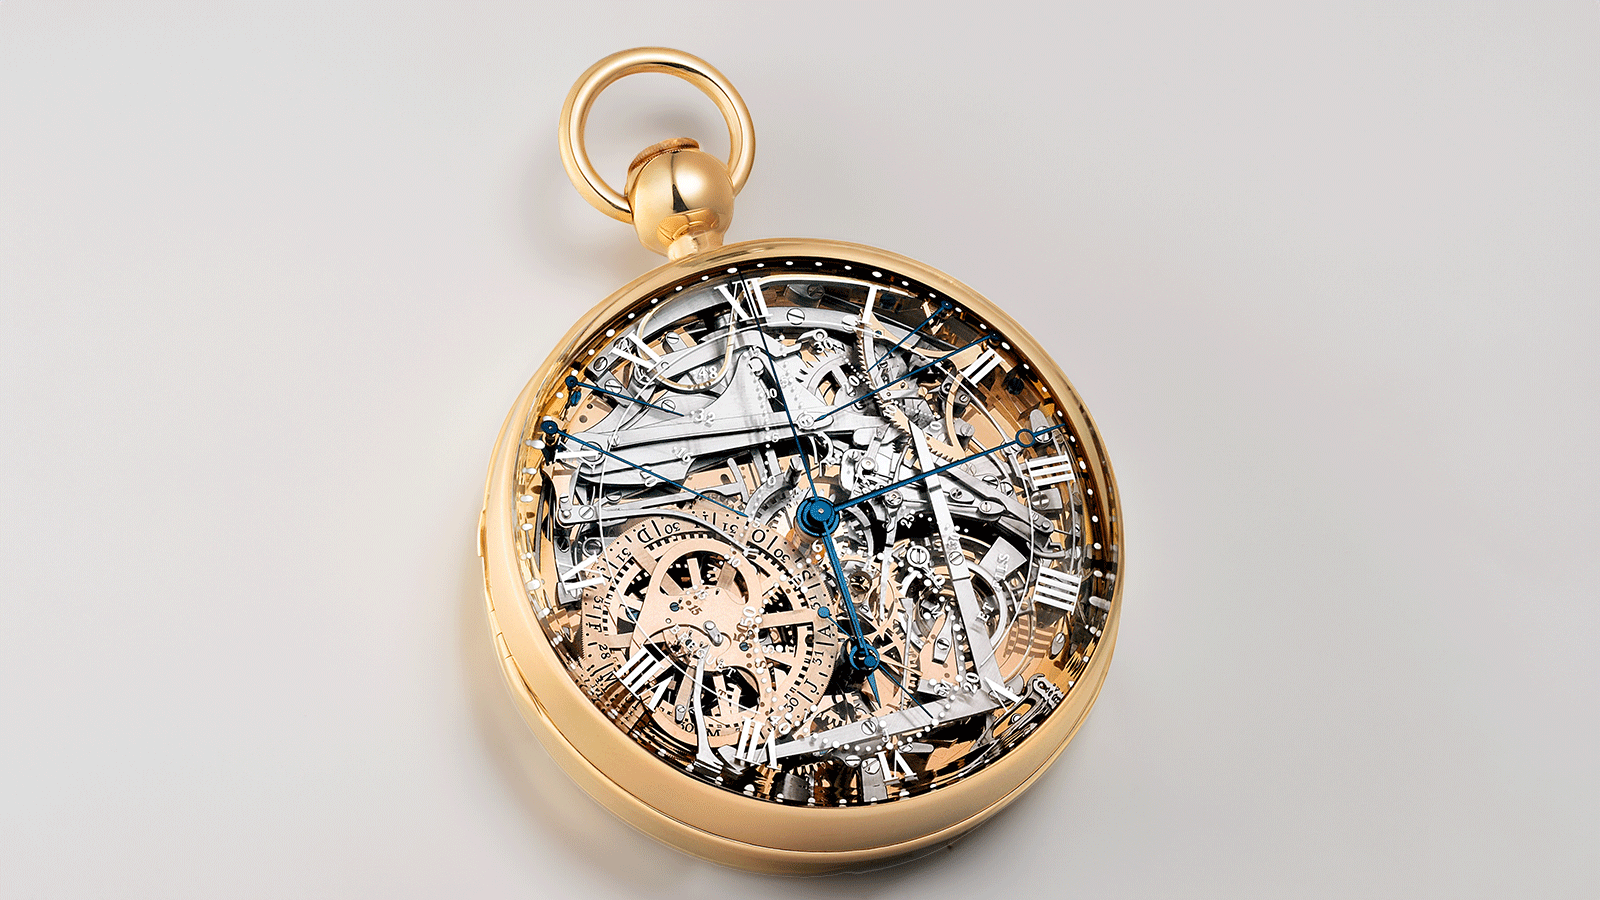 Reproduction of the watch no 160 called "Marie-Antoinette" based only on pictures and descriptions. Today this watch is still considered as the 5th most complicated in the world.